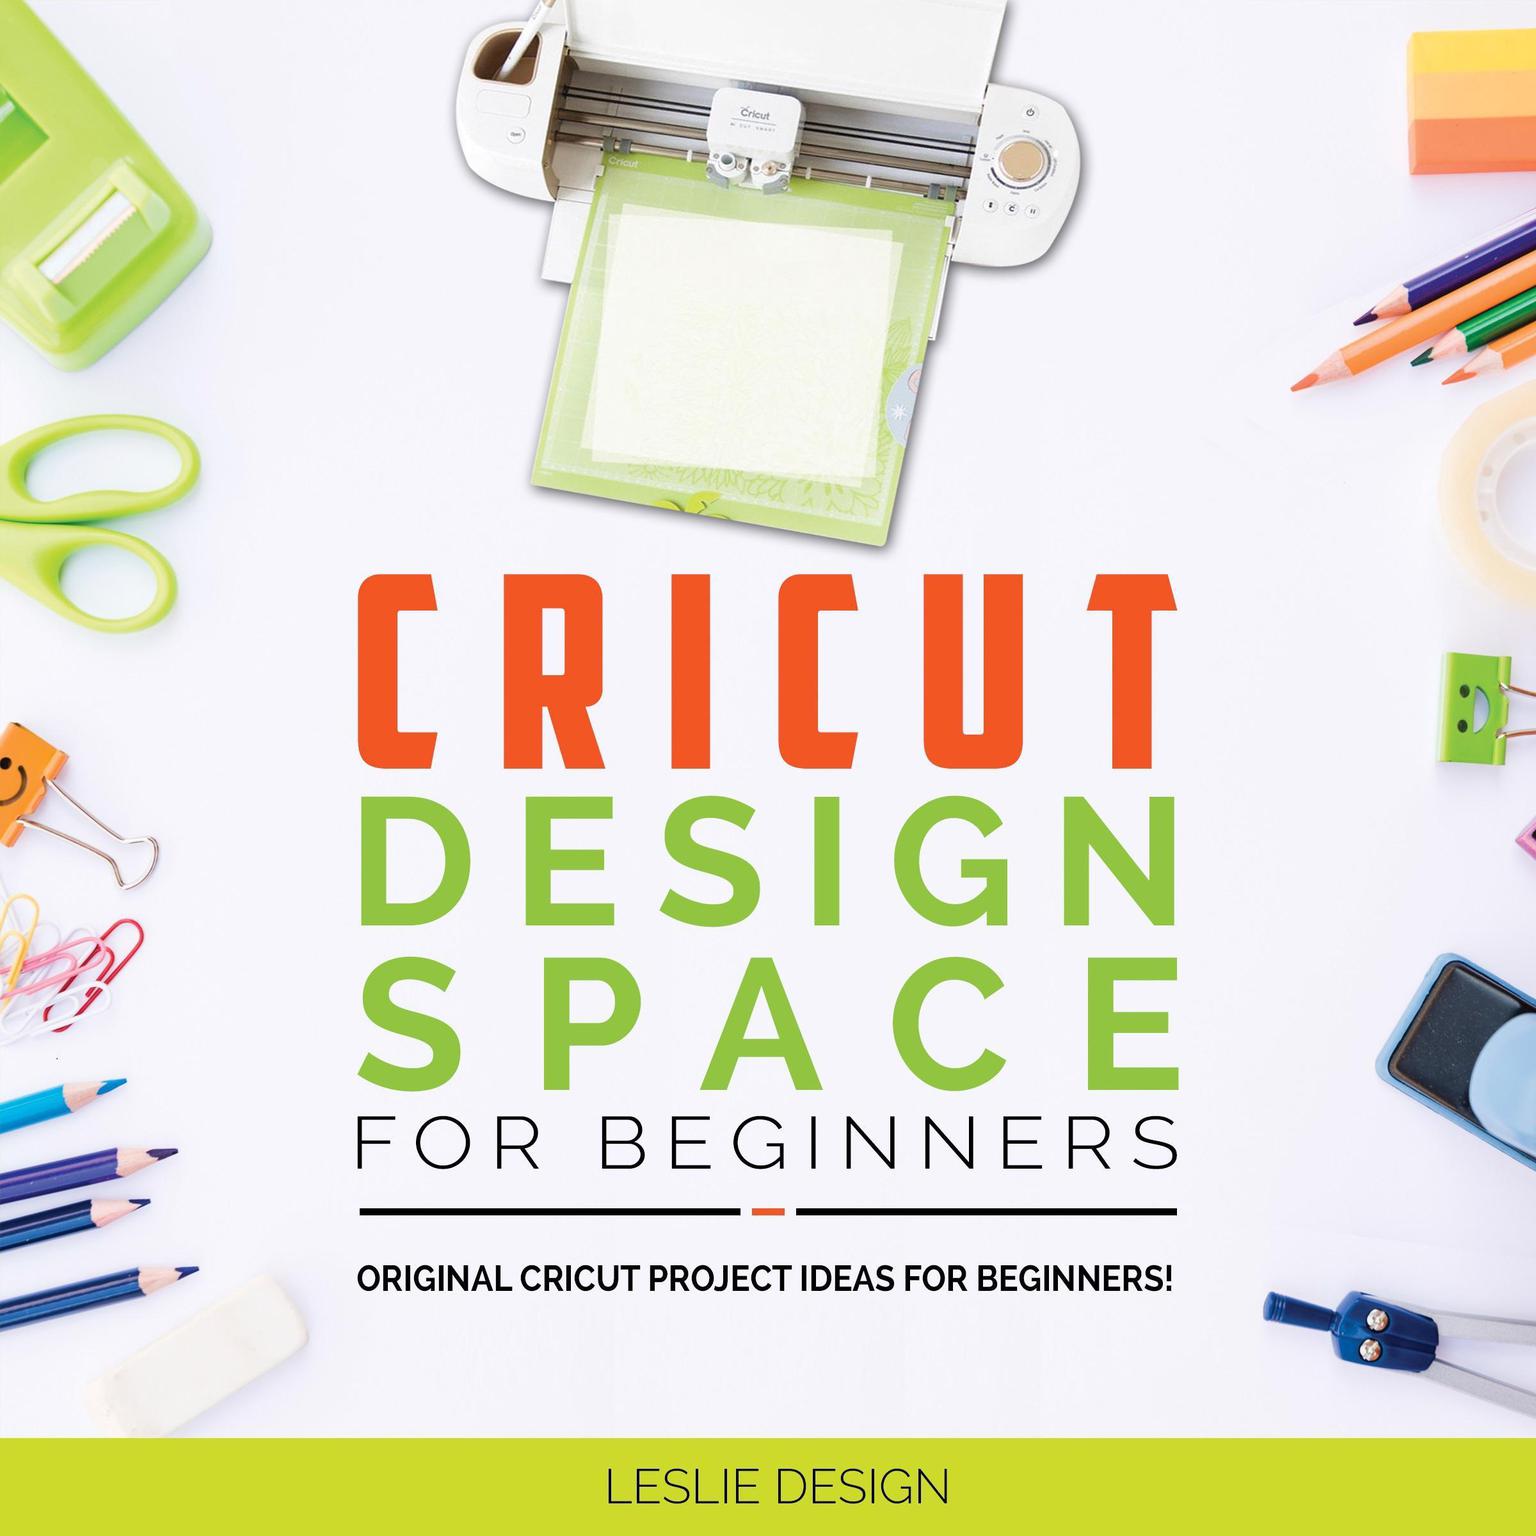 Cricut Design Space for Beginners: Original Cricut Project Ideas for Beginners! The Complete Guide to Design-Space, with Step-by-Step Instructions, to Inspire Your Imagination and Creativity Audiobook, by Leslie Design